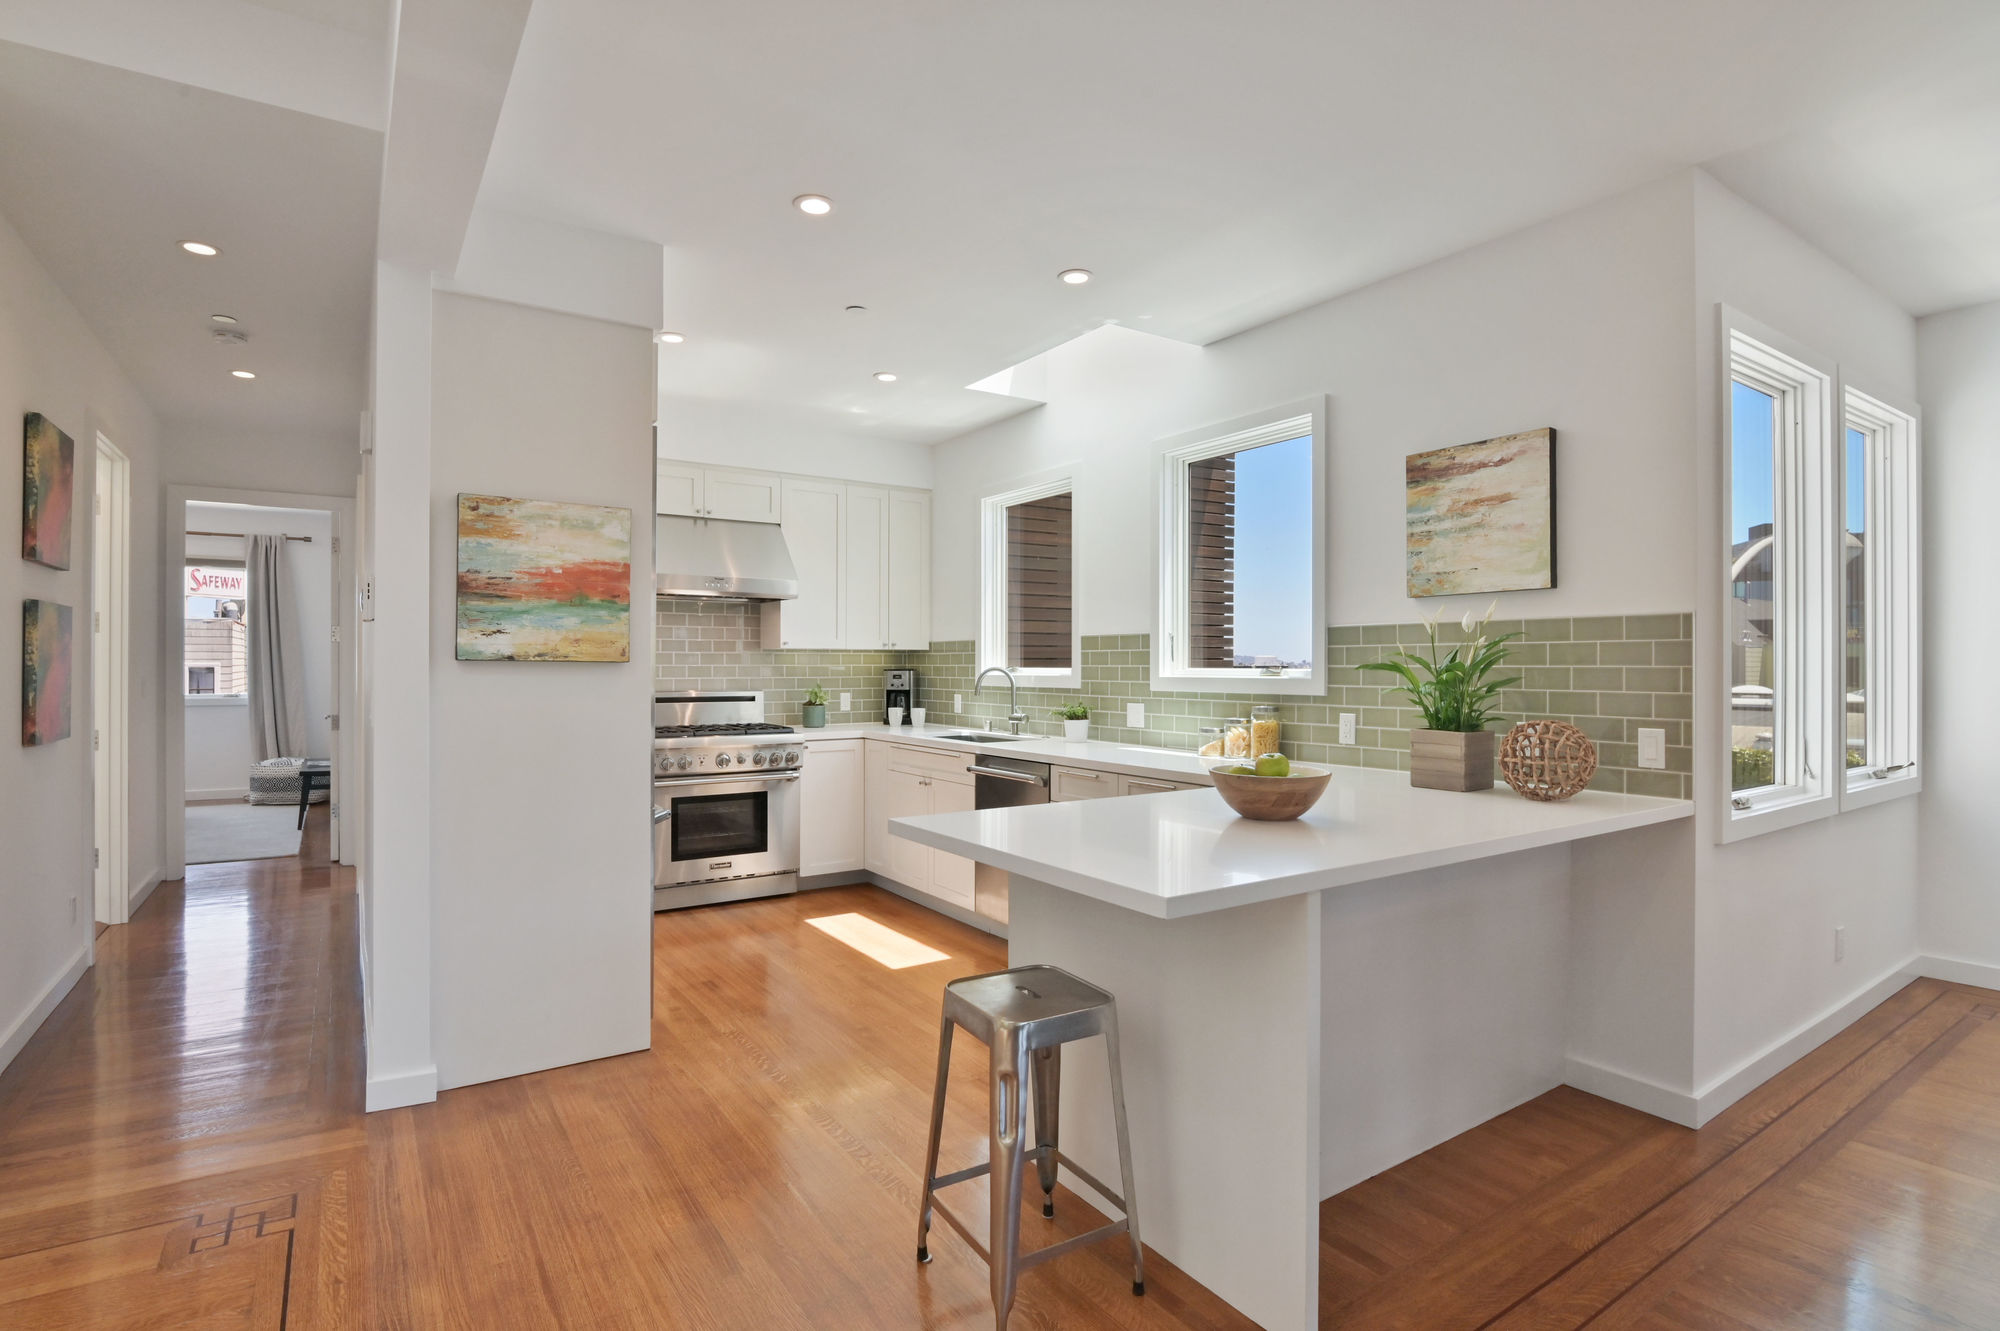 Property Photo: Kitchen, with lots of natural light, wood floors, and light green tile backsplash